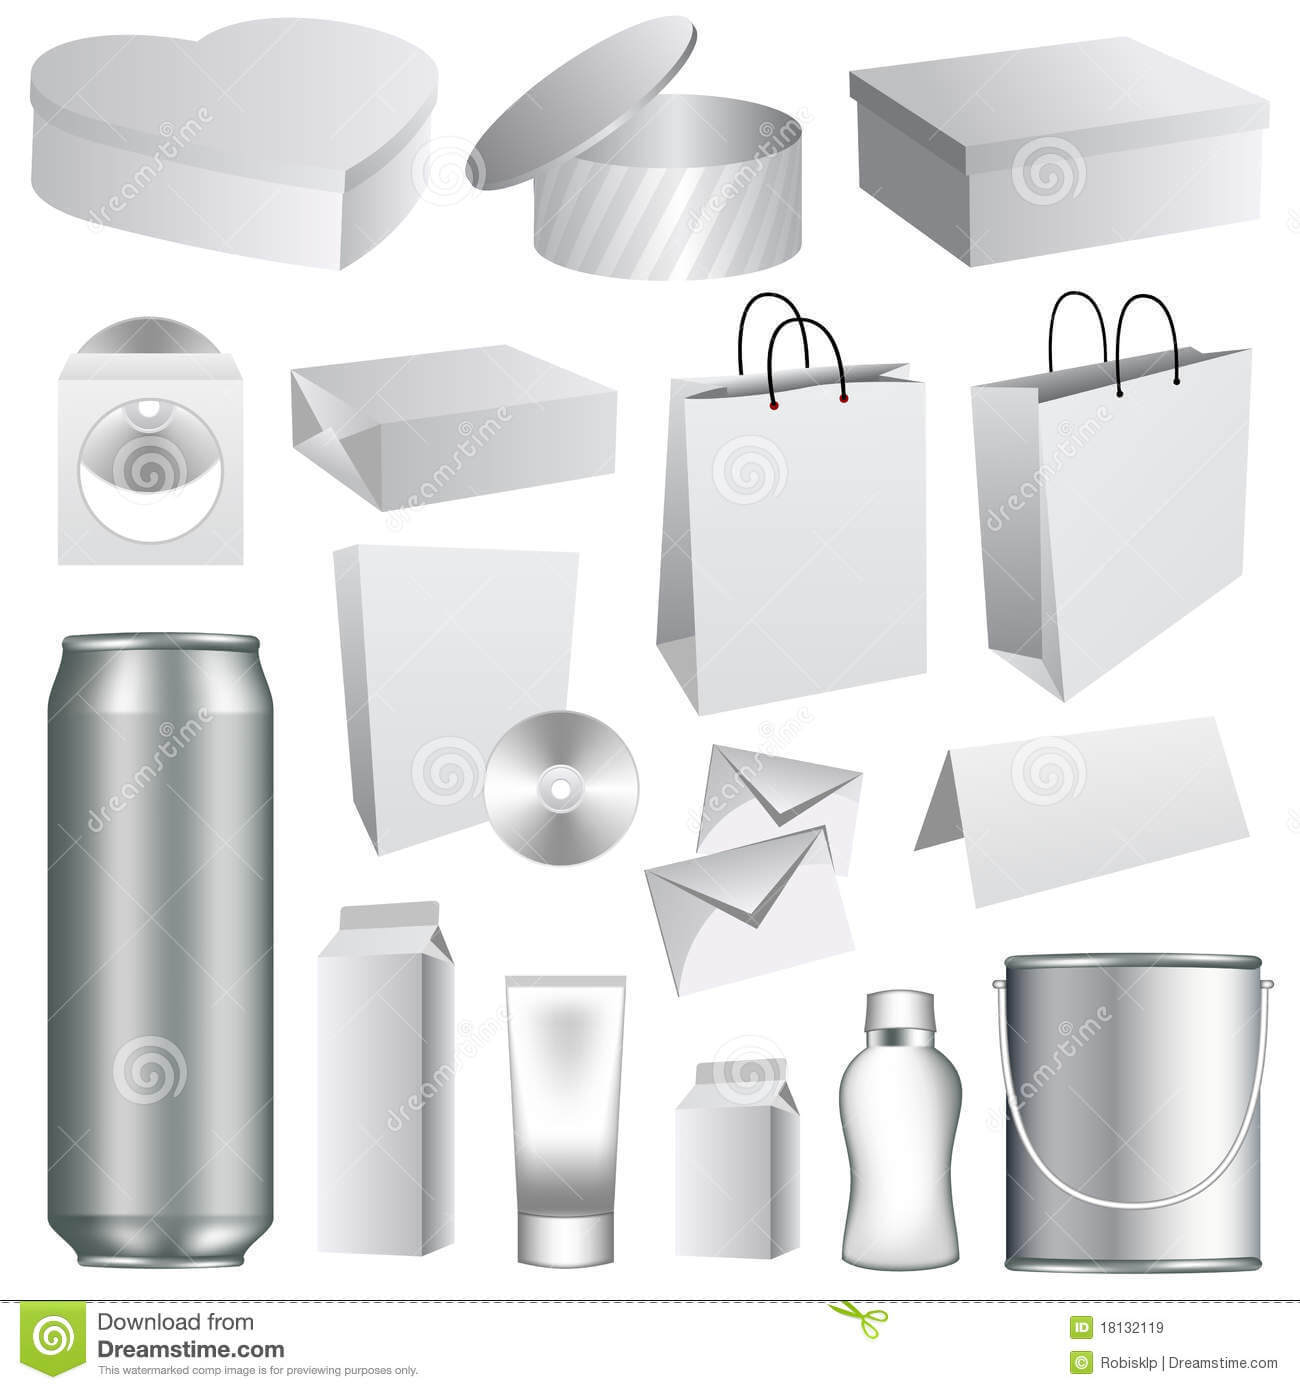 Blank Packaging Templates Stock Vector. Illustration Of For Blank Packaging Templates